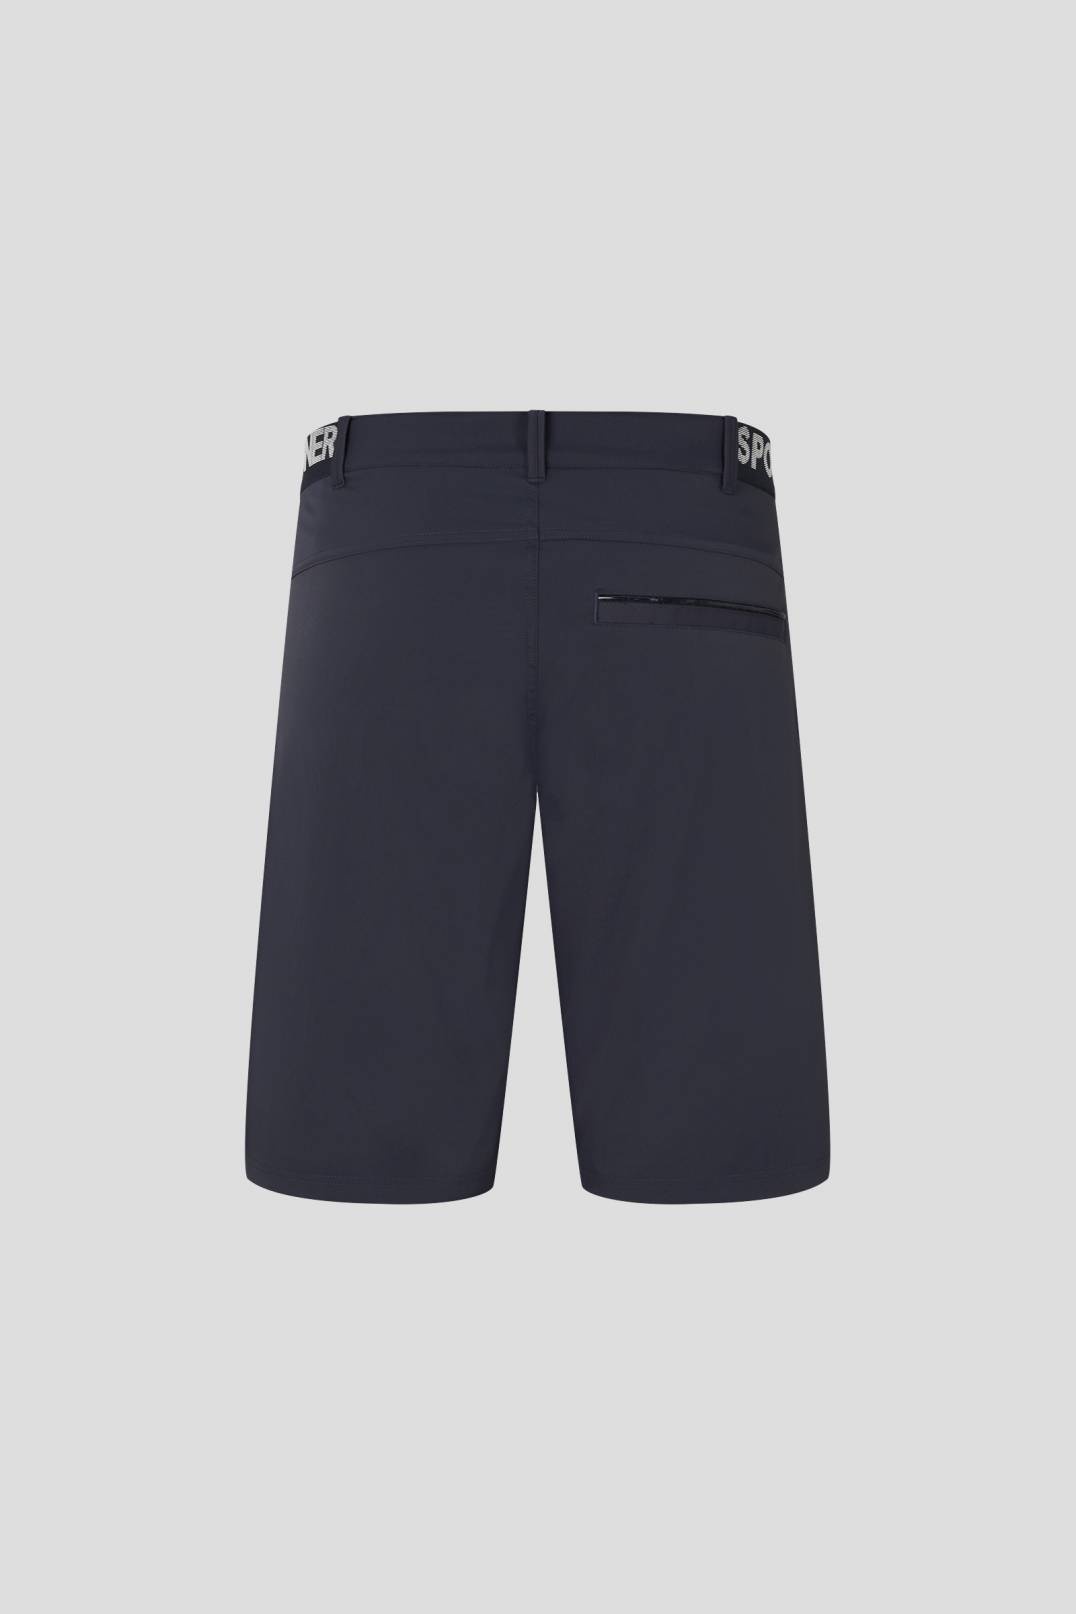 COLVIN FUNCTIONAL SHORTS IN NAVY BLUE - 6